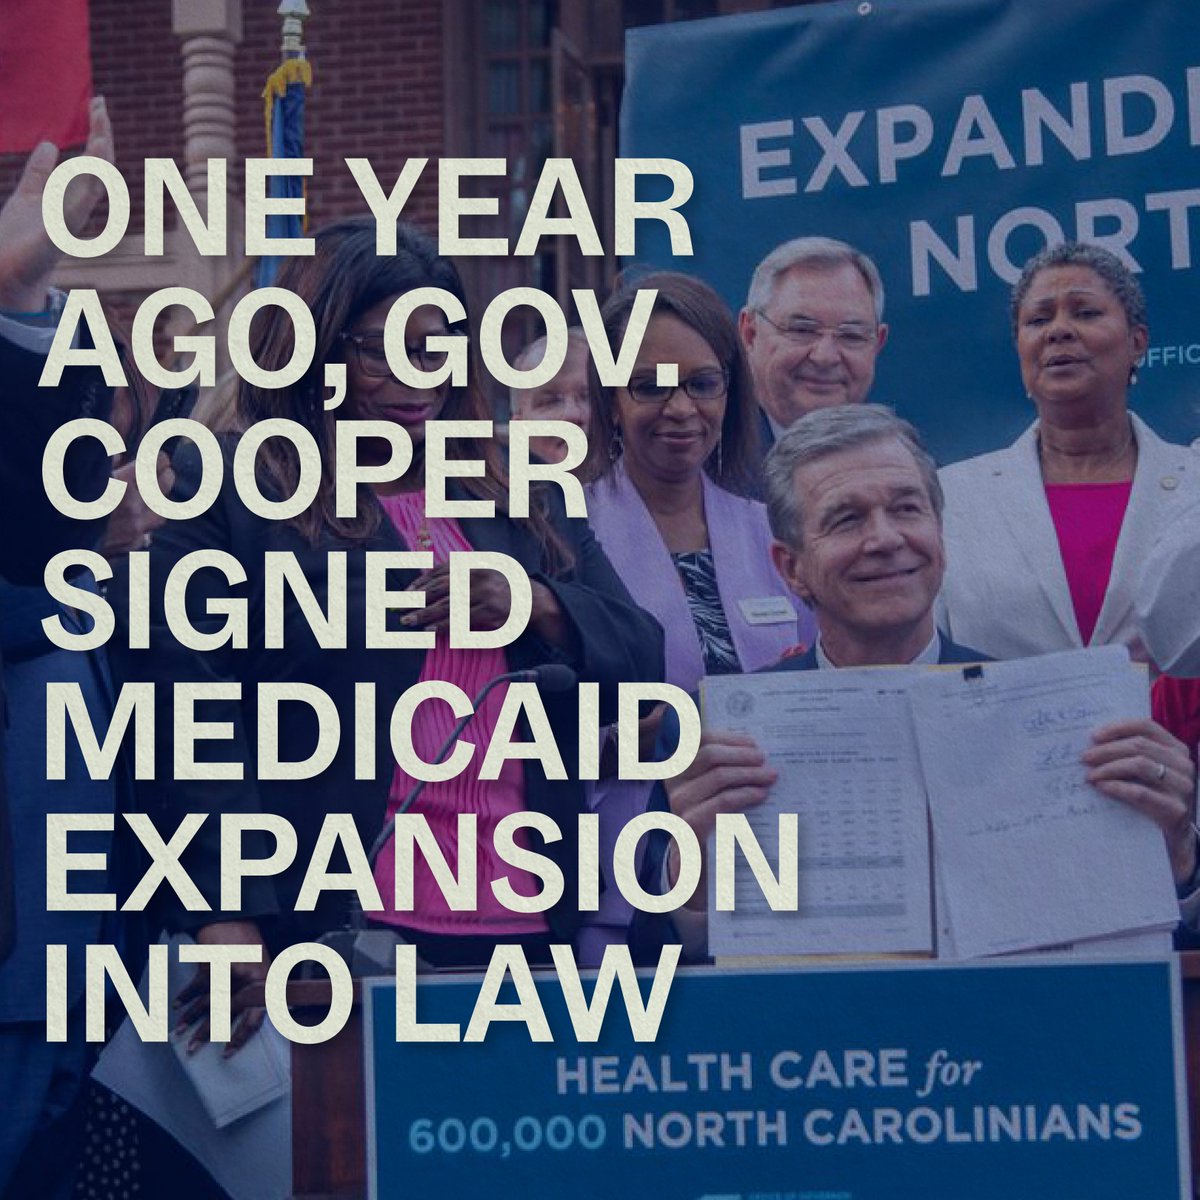 It’s the *one year anniversary* of Gov. @RoyCooperNC signing Medicaid expansion into law!

And now, more than 600,000 North Carolinians have access to affordable, quality health care. #DemGovsGetItDone